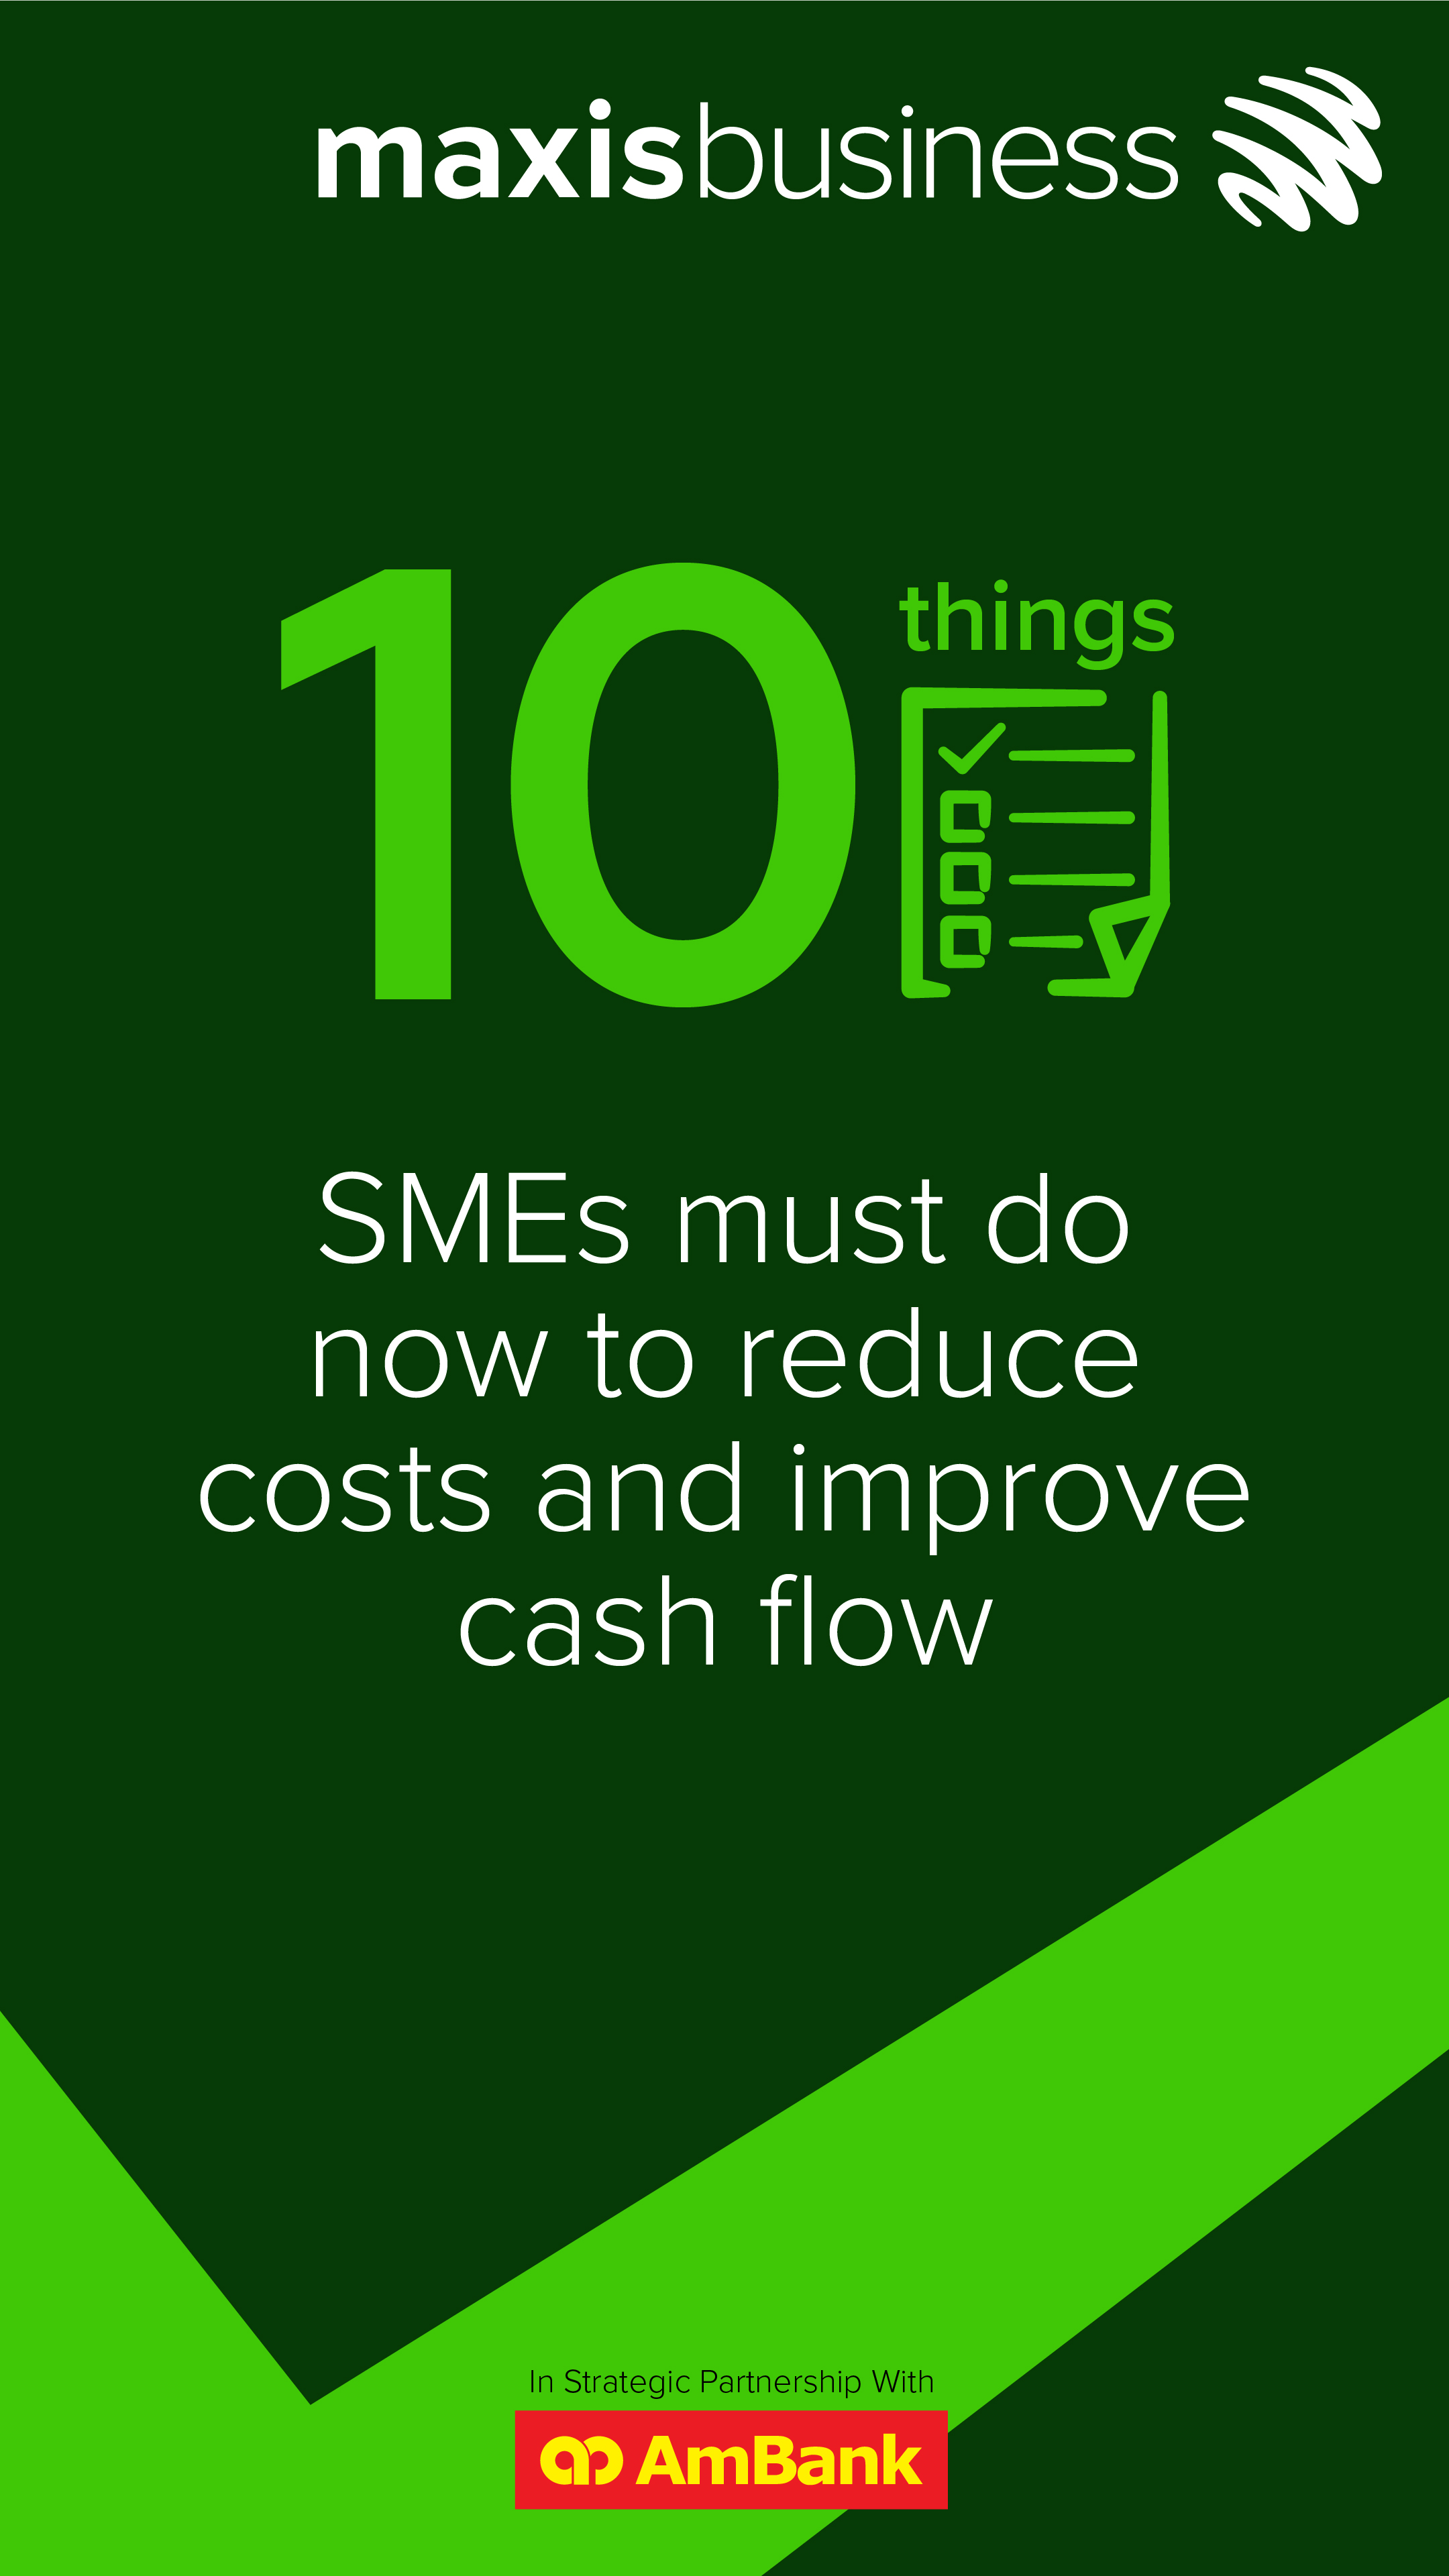 SMEs must do now to reduce costs and improve cash flow